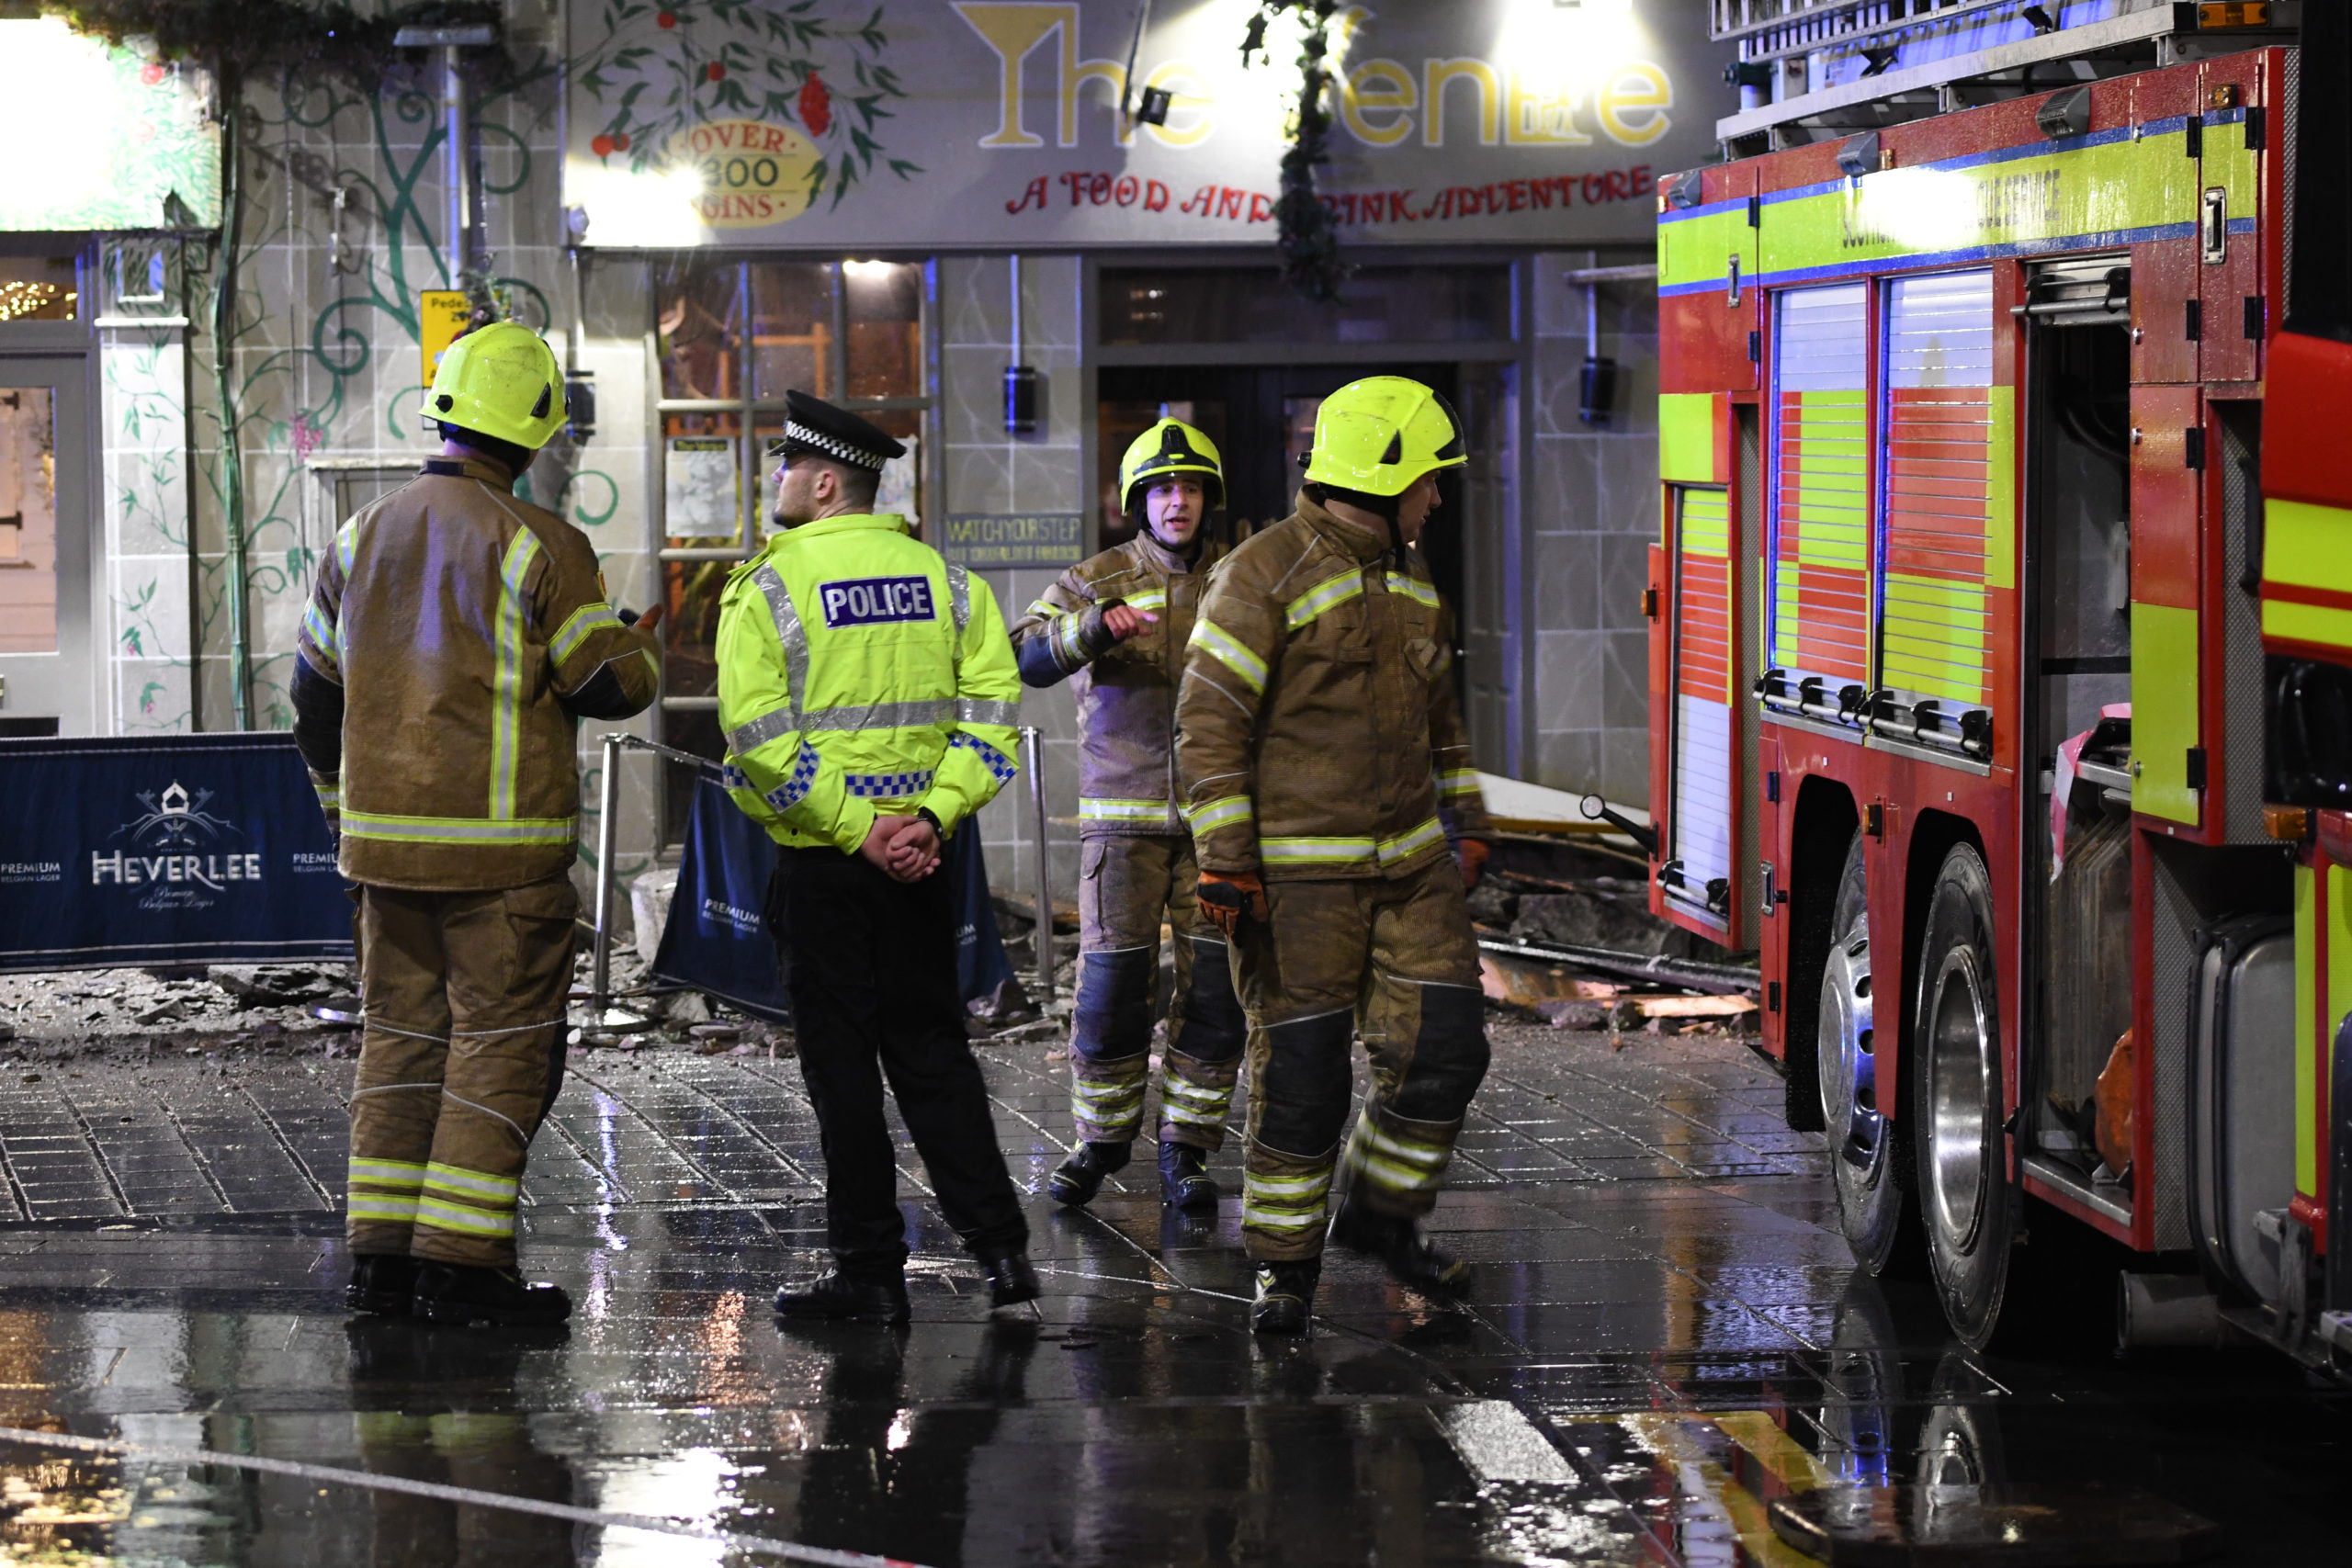 Eighty evacuated from The Venue in Perth after facade collapses